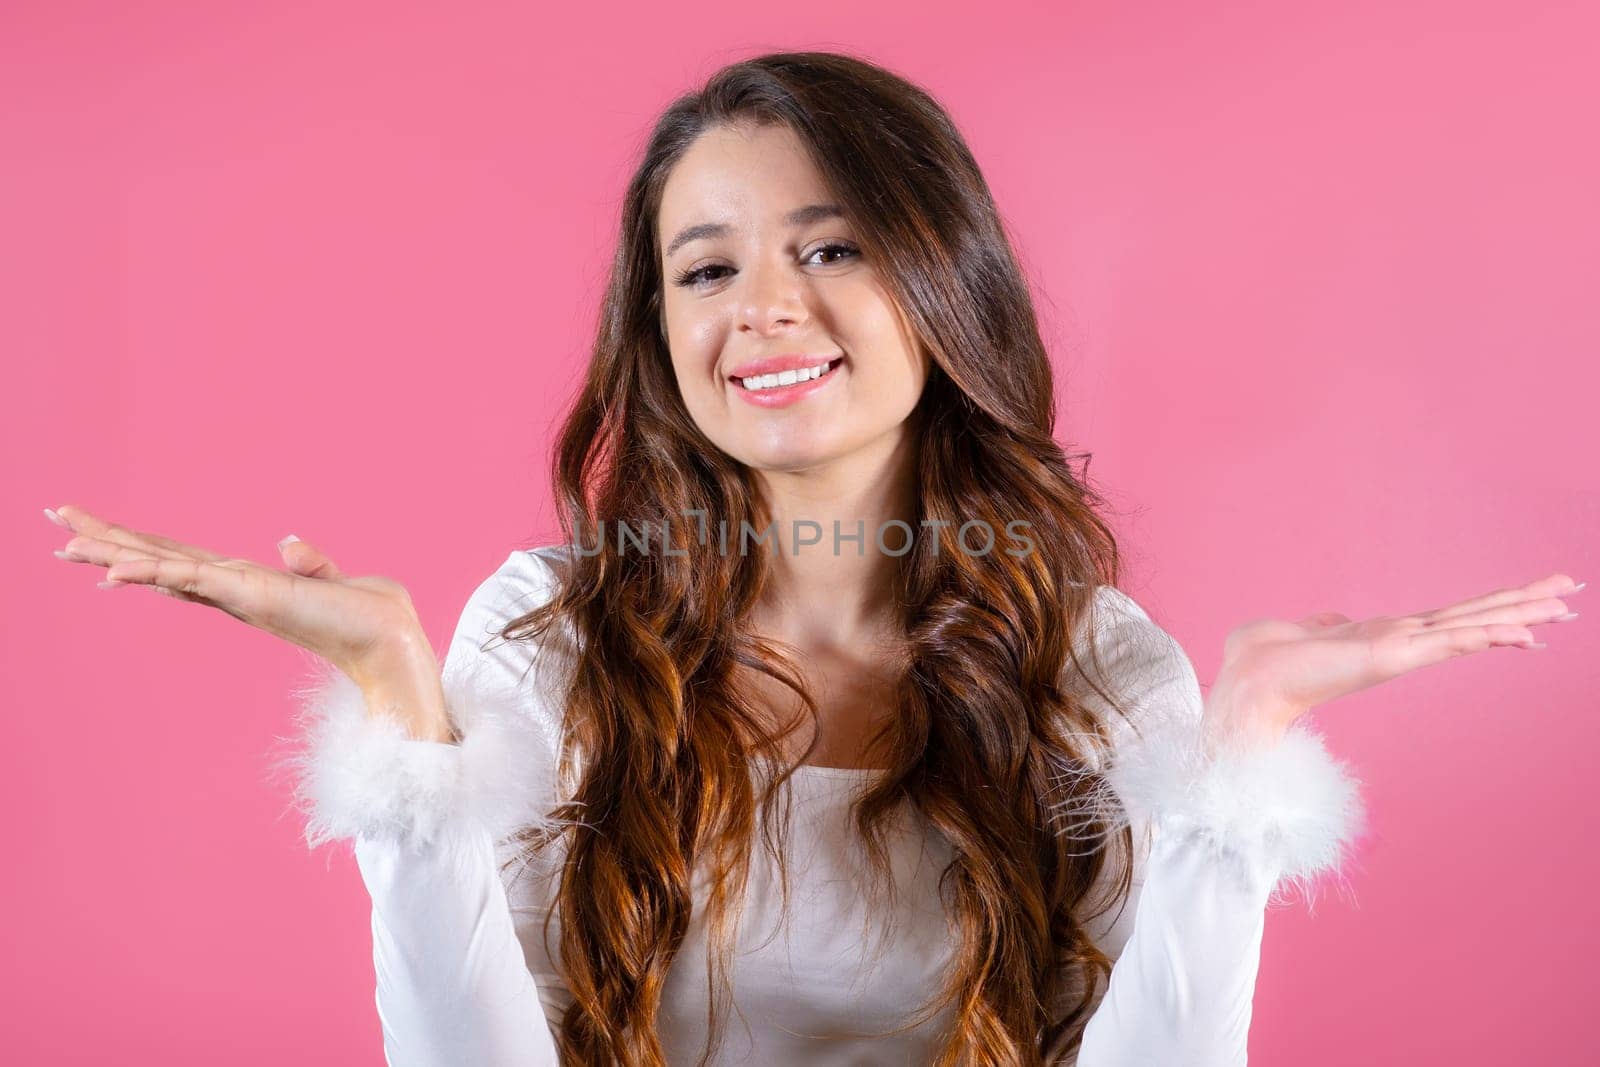 Portrait of a cheerful young lady happily gesturing with her hands on the pink background